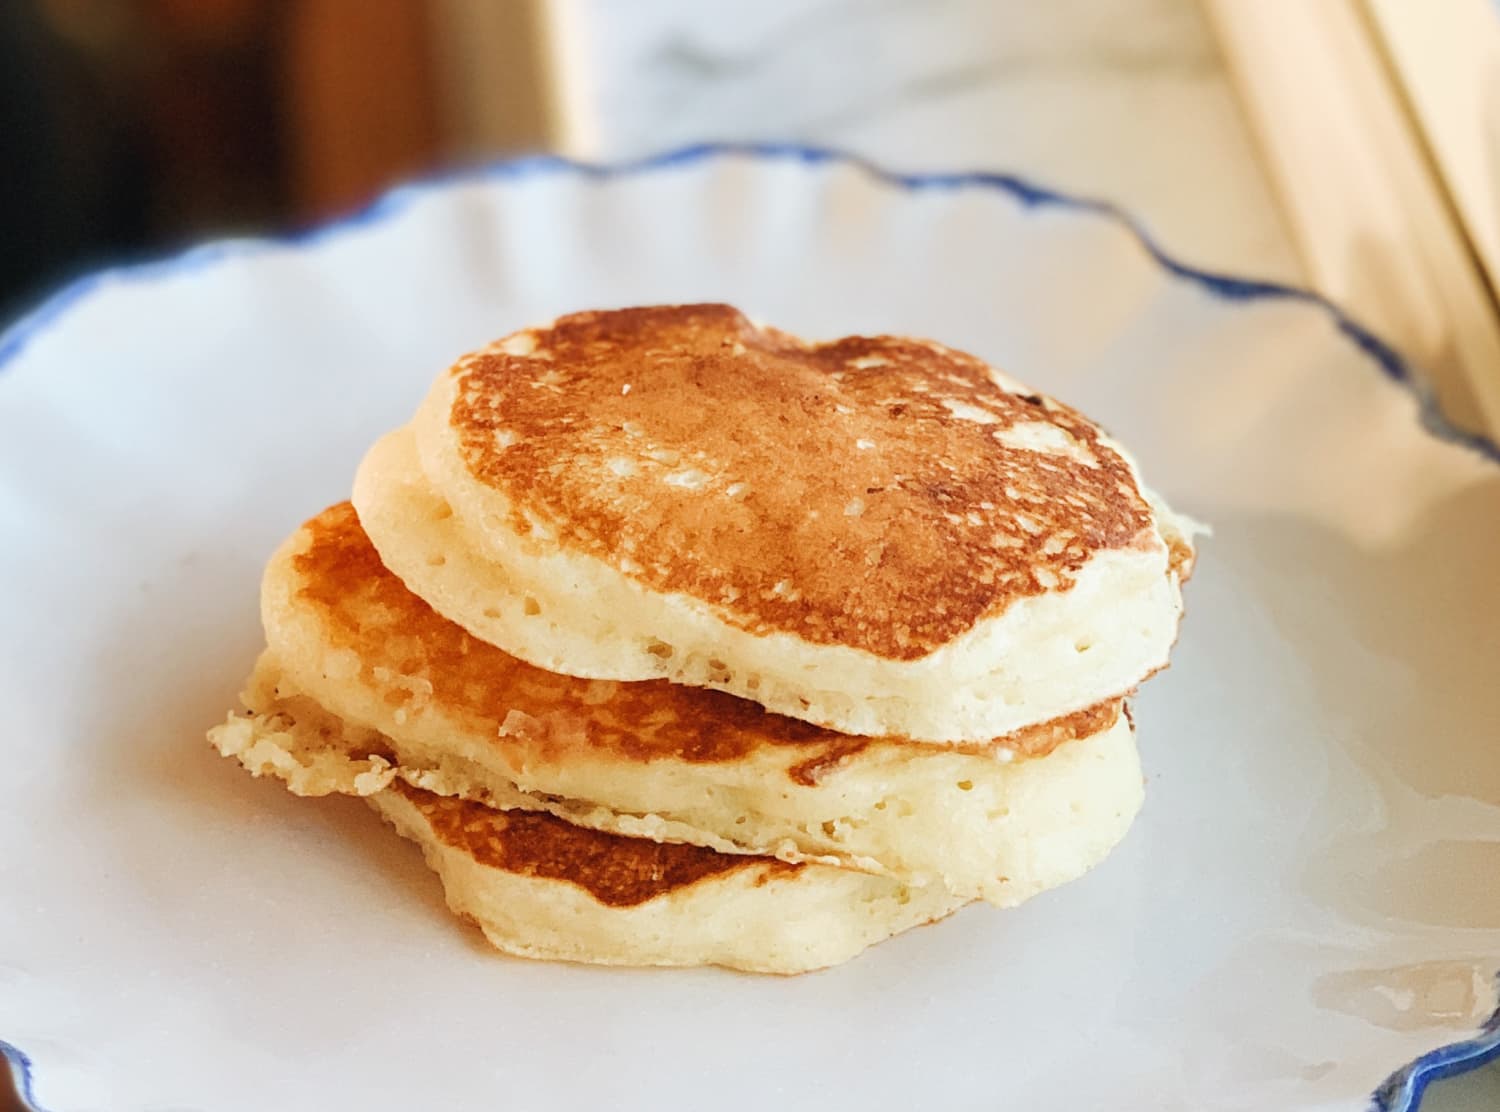 The Practically Perfect Pancake Recipe I Make Over and Over